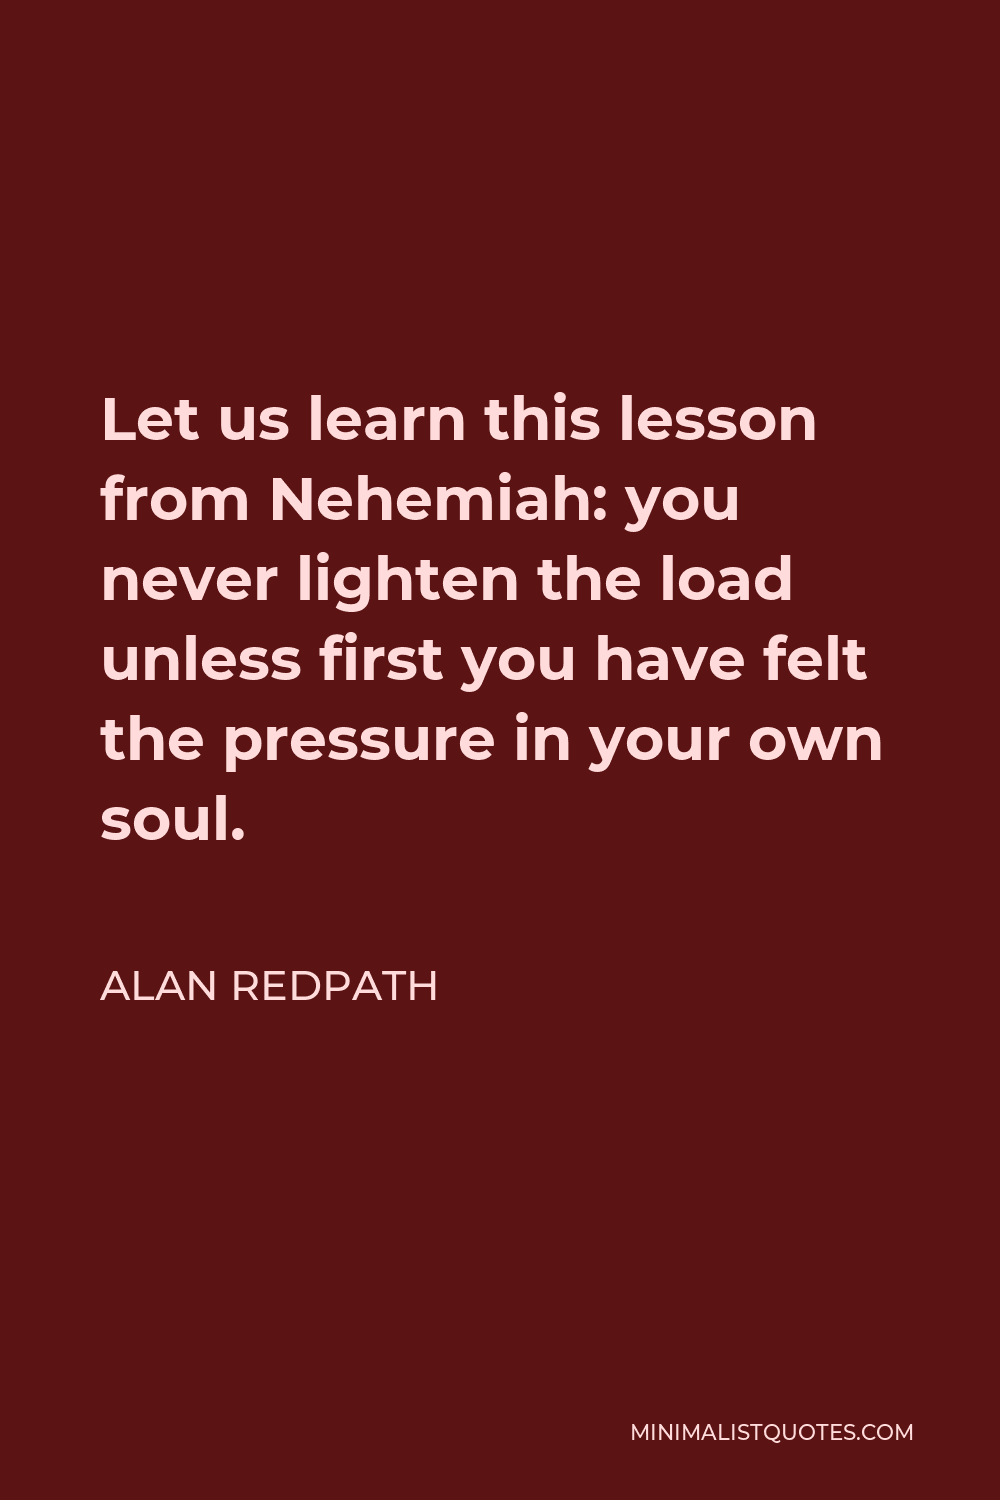 Alan Redpath Quote - Let us learn this lesson from Nehemiah: you never lighten the load unless first you have felt the pressure in your own soul.